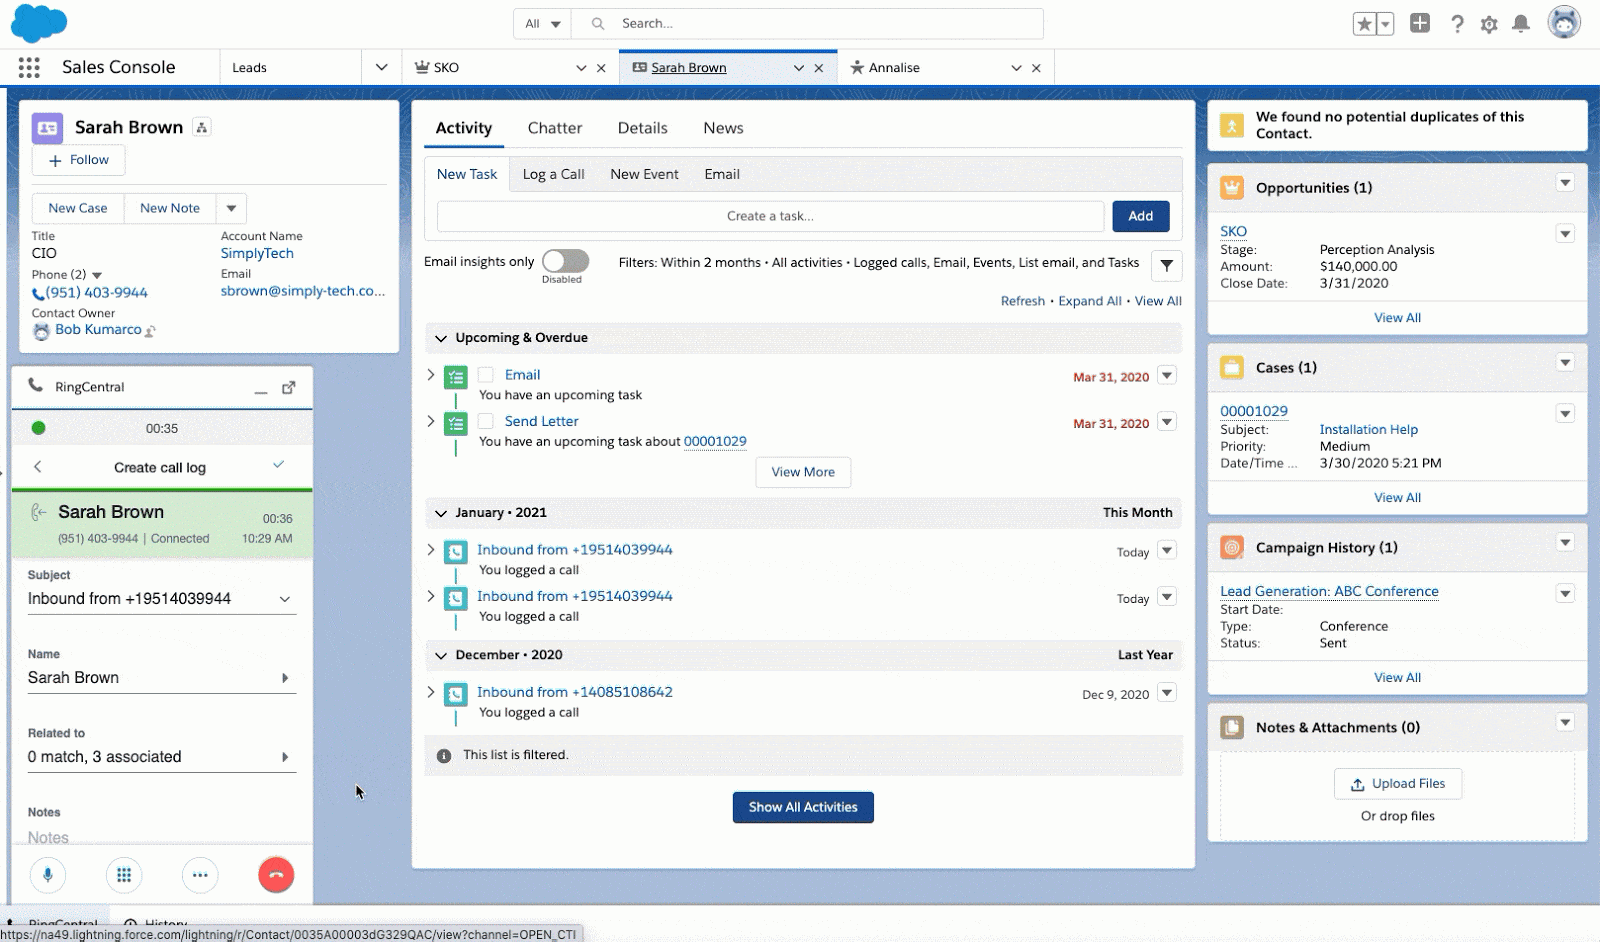 RingCentral for Salesforce